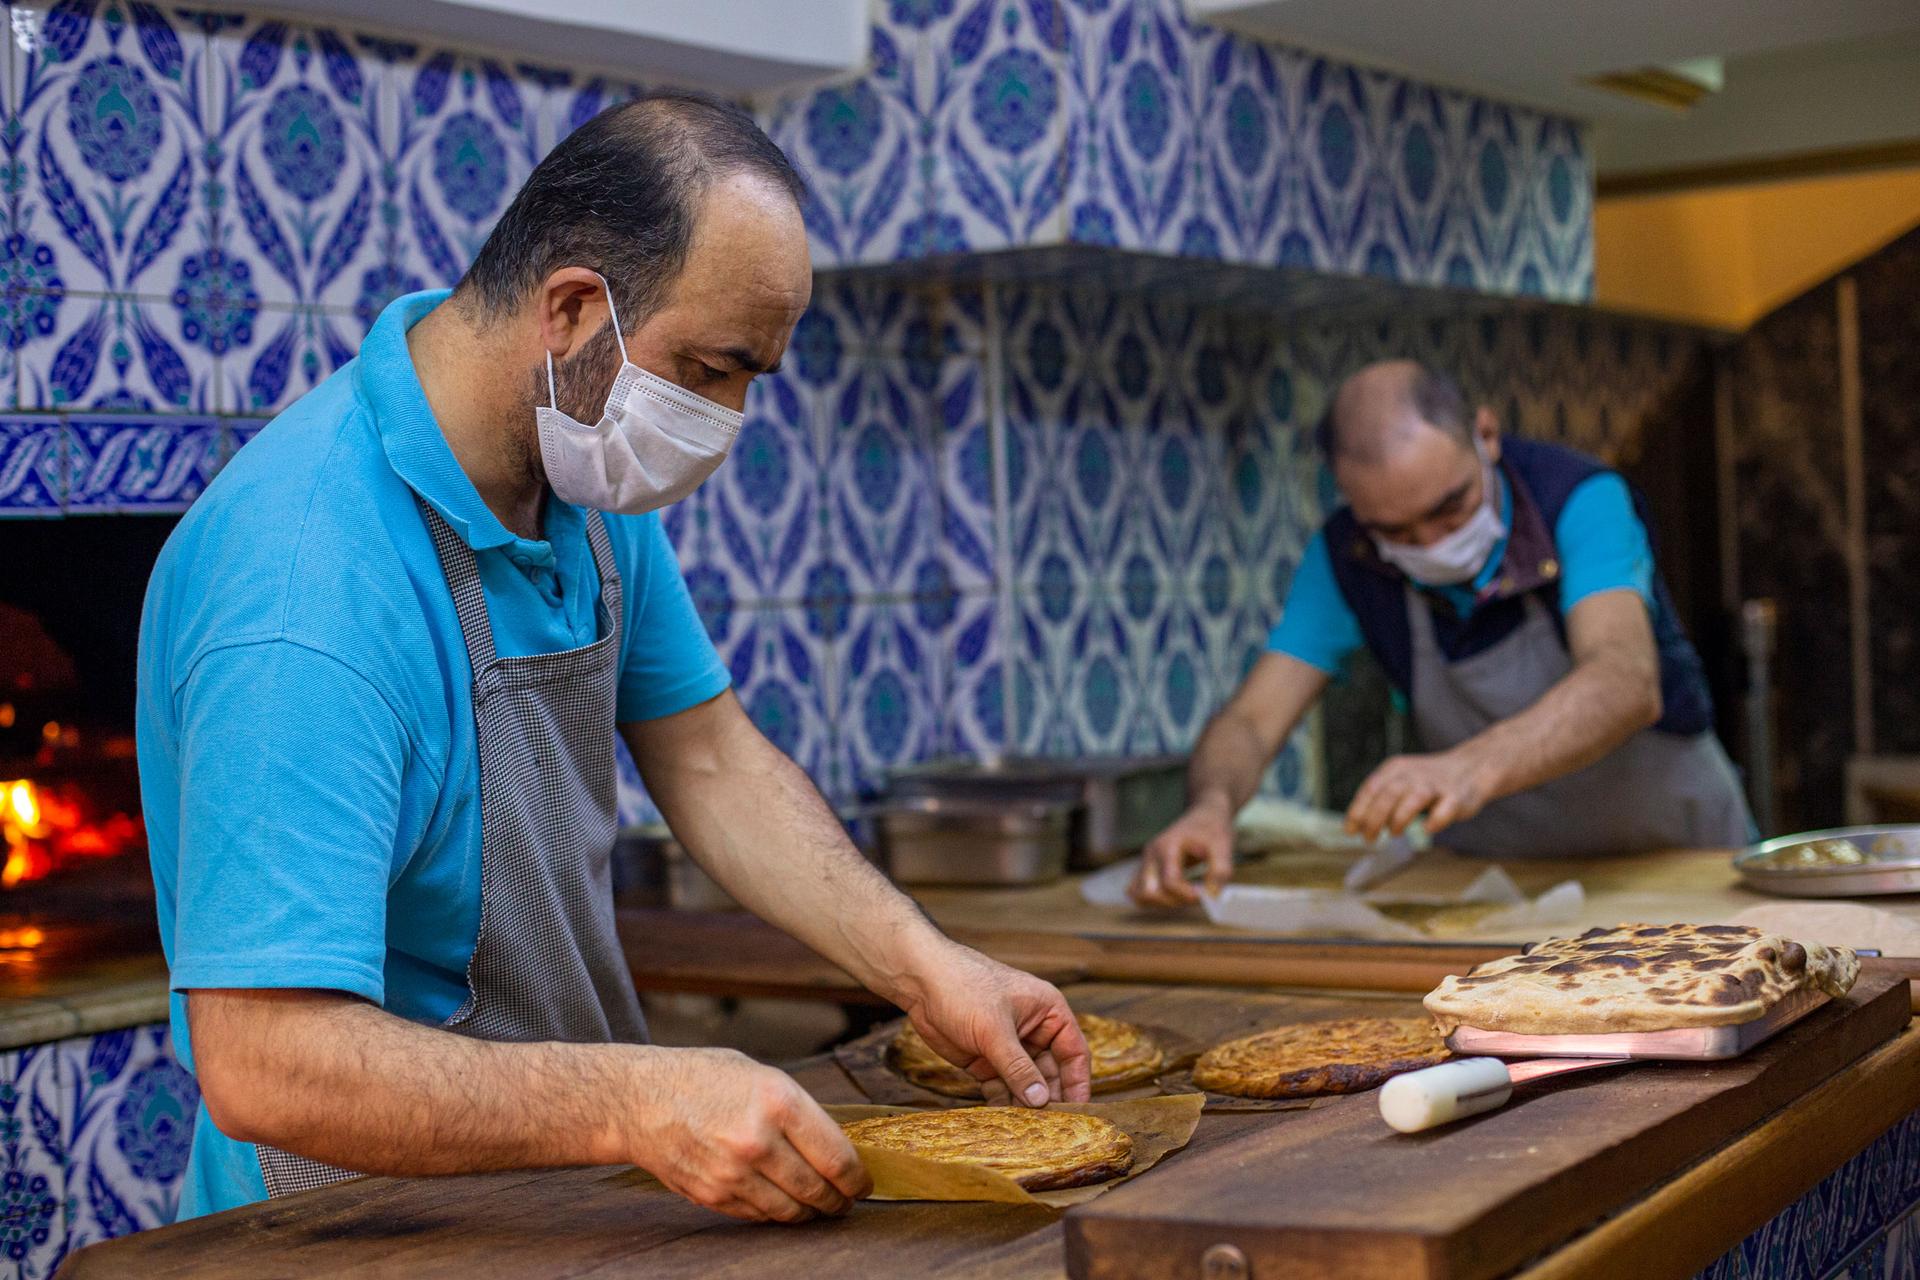 A man is shown wearing a blue shirt and gray aprin while handling a flat bread-like dish.